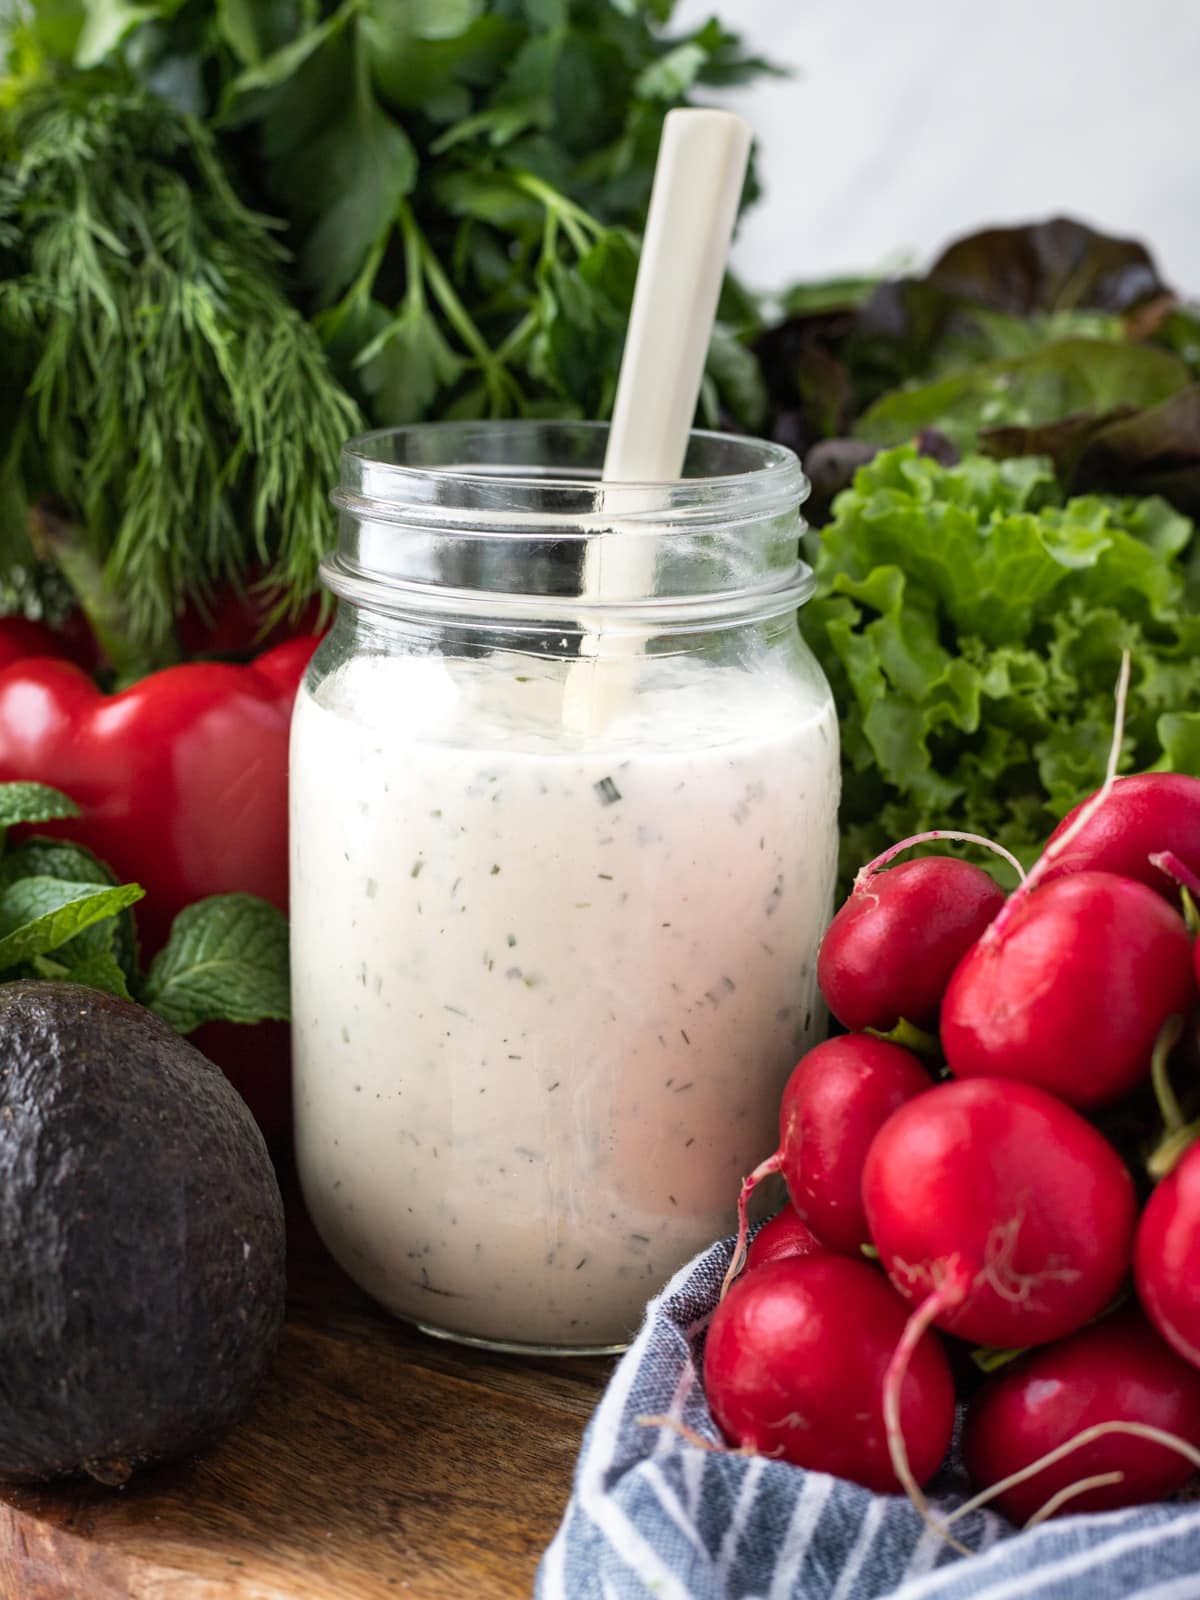 Jar of ranch dressing with a spoon surrounded by radishes, avocado tomatoes and lettuce greens.